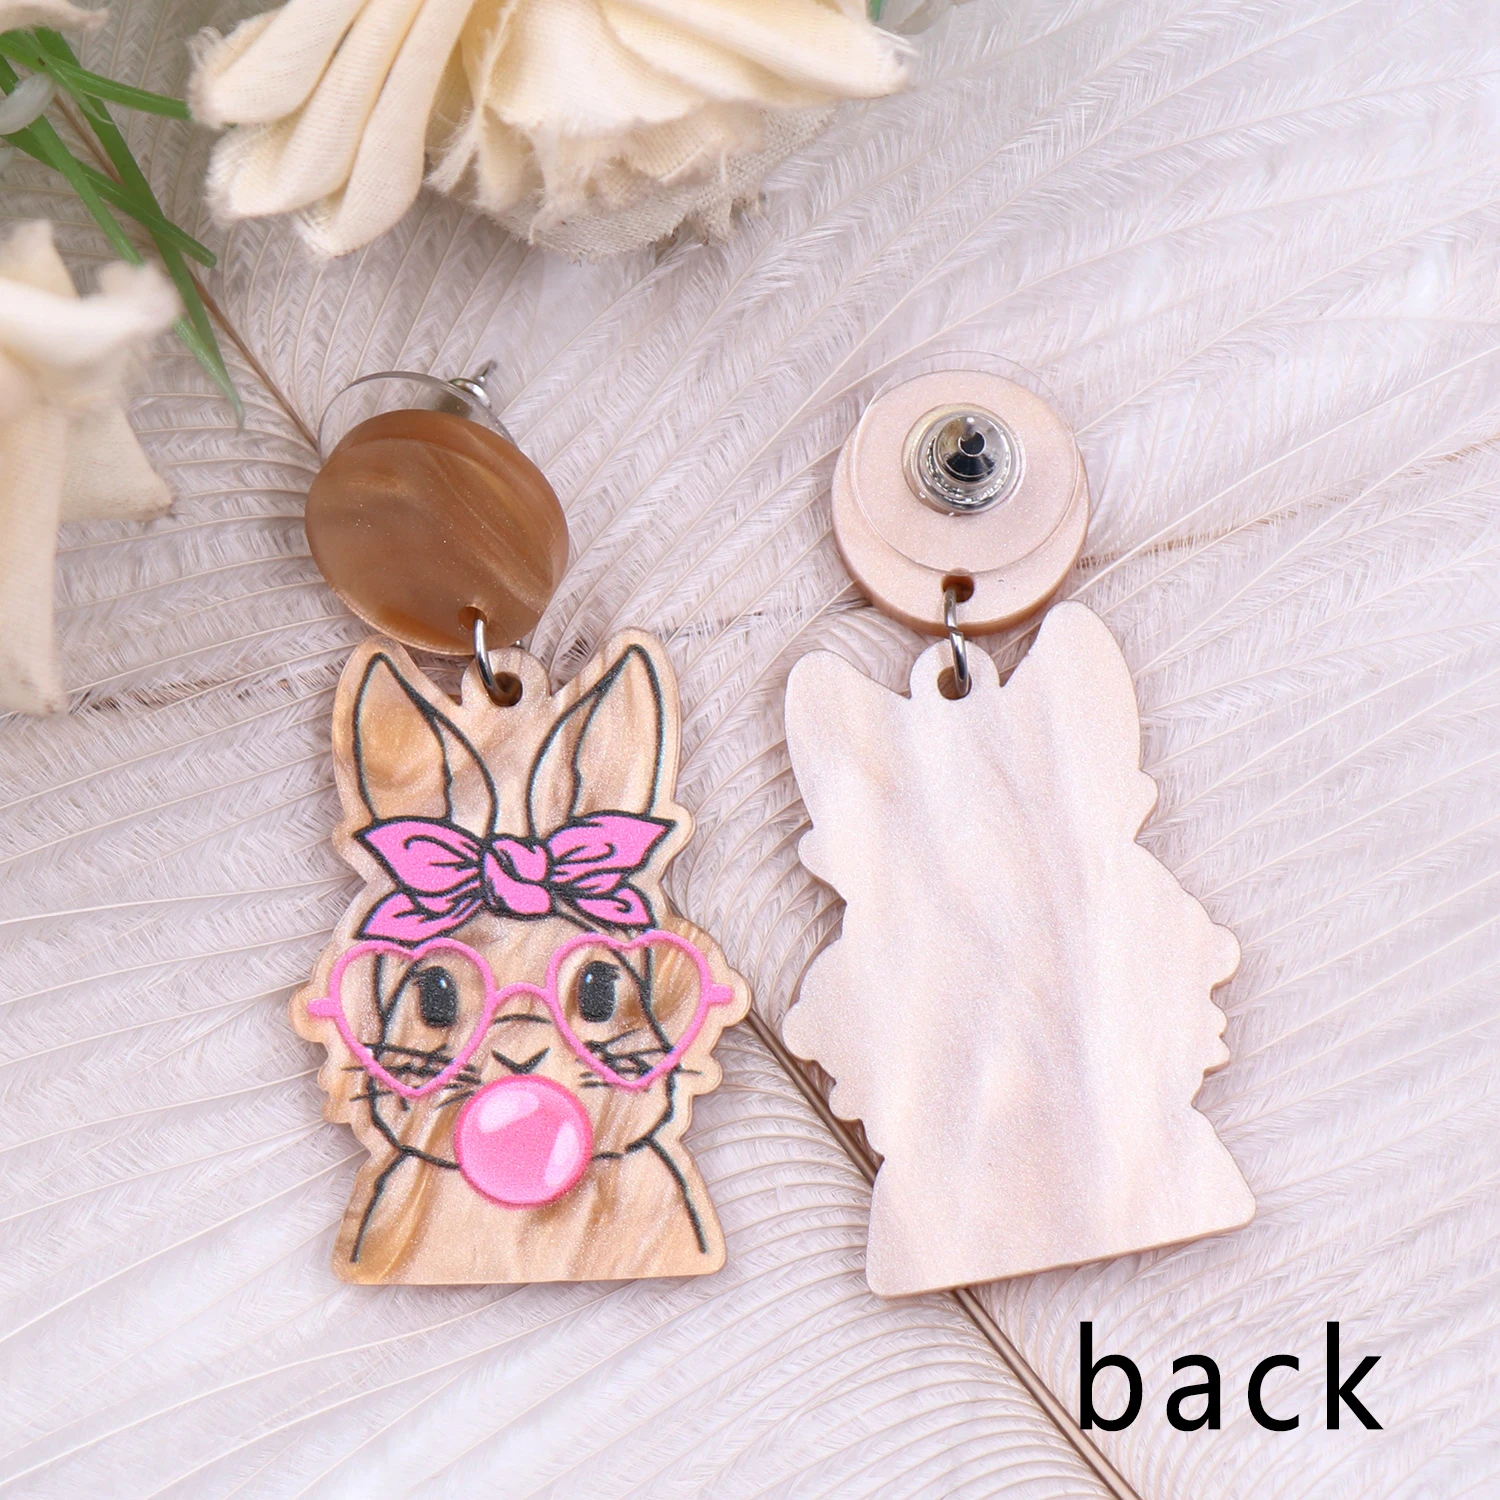 1pair New product CN Drop Cartoon bunny with heart glasses cute Easter Holiday Acrylic earrings Jewelry for women